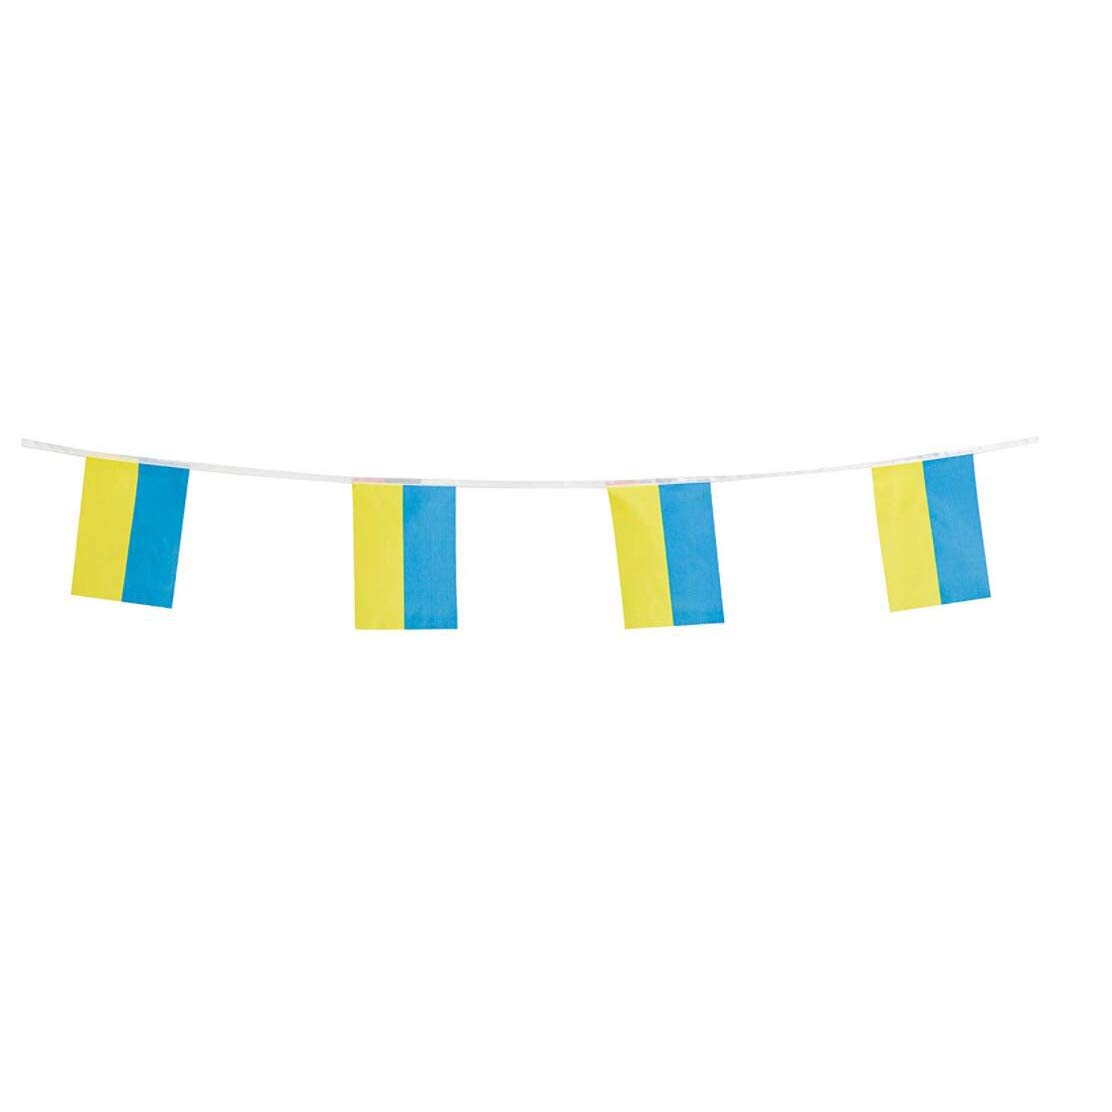 pretty_jessie Ukraine Flags Ukrainian Small String Flag Banner Mini National Country World Flags Pennant Banners For Party Events Classroom Ga